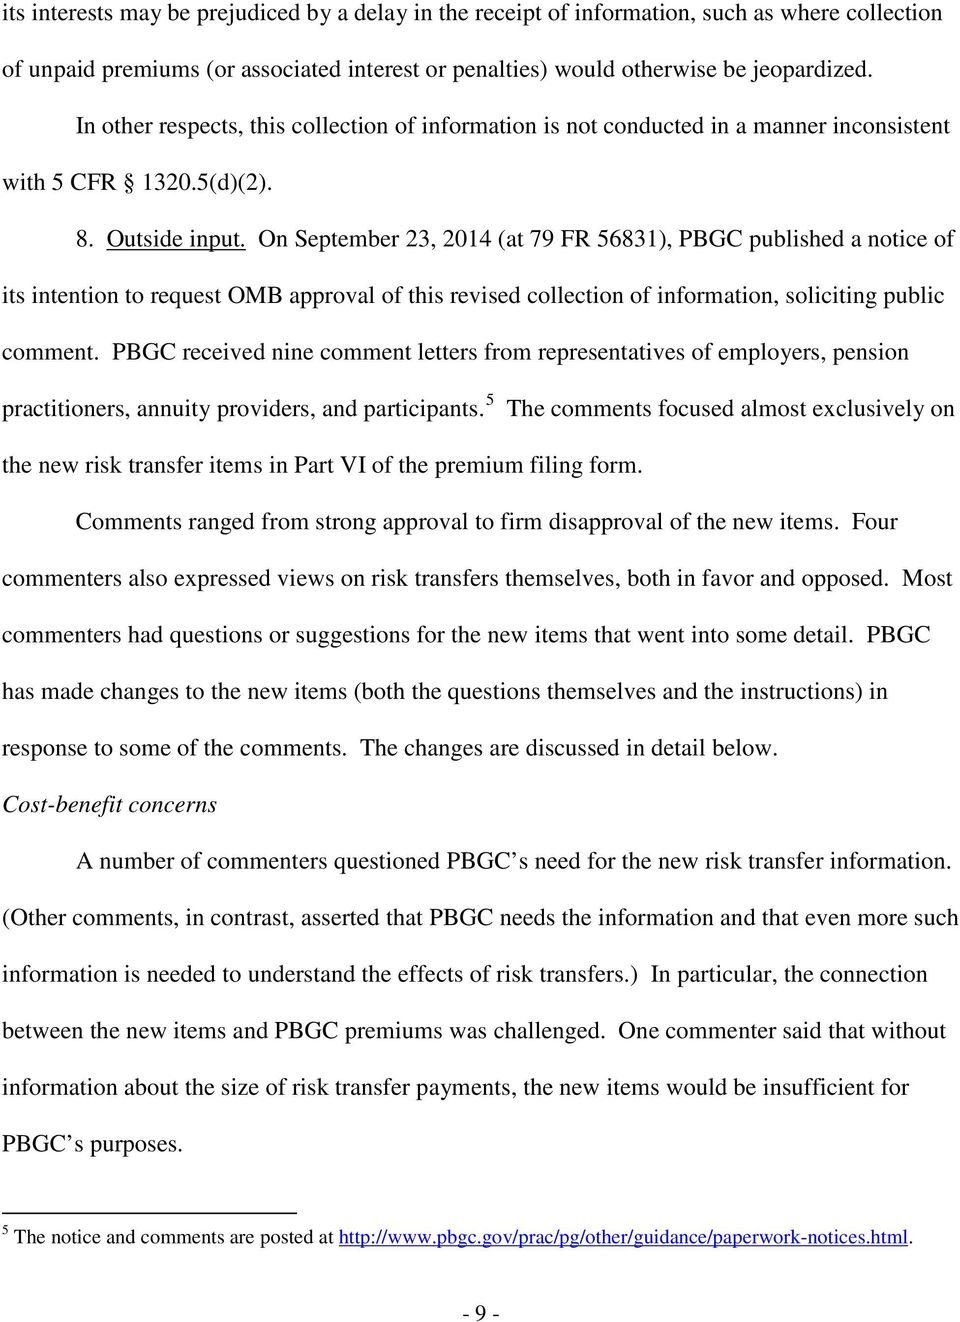 On September 23, 2014 (at 79 FR 56831), PBGC published a notice of its intention to request OMB approval of this revised collection of information, soliciting public comment.